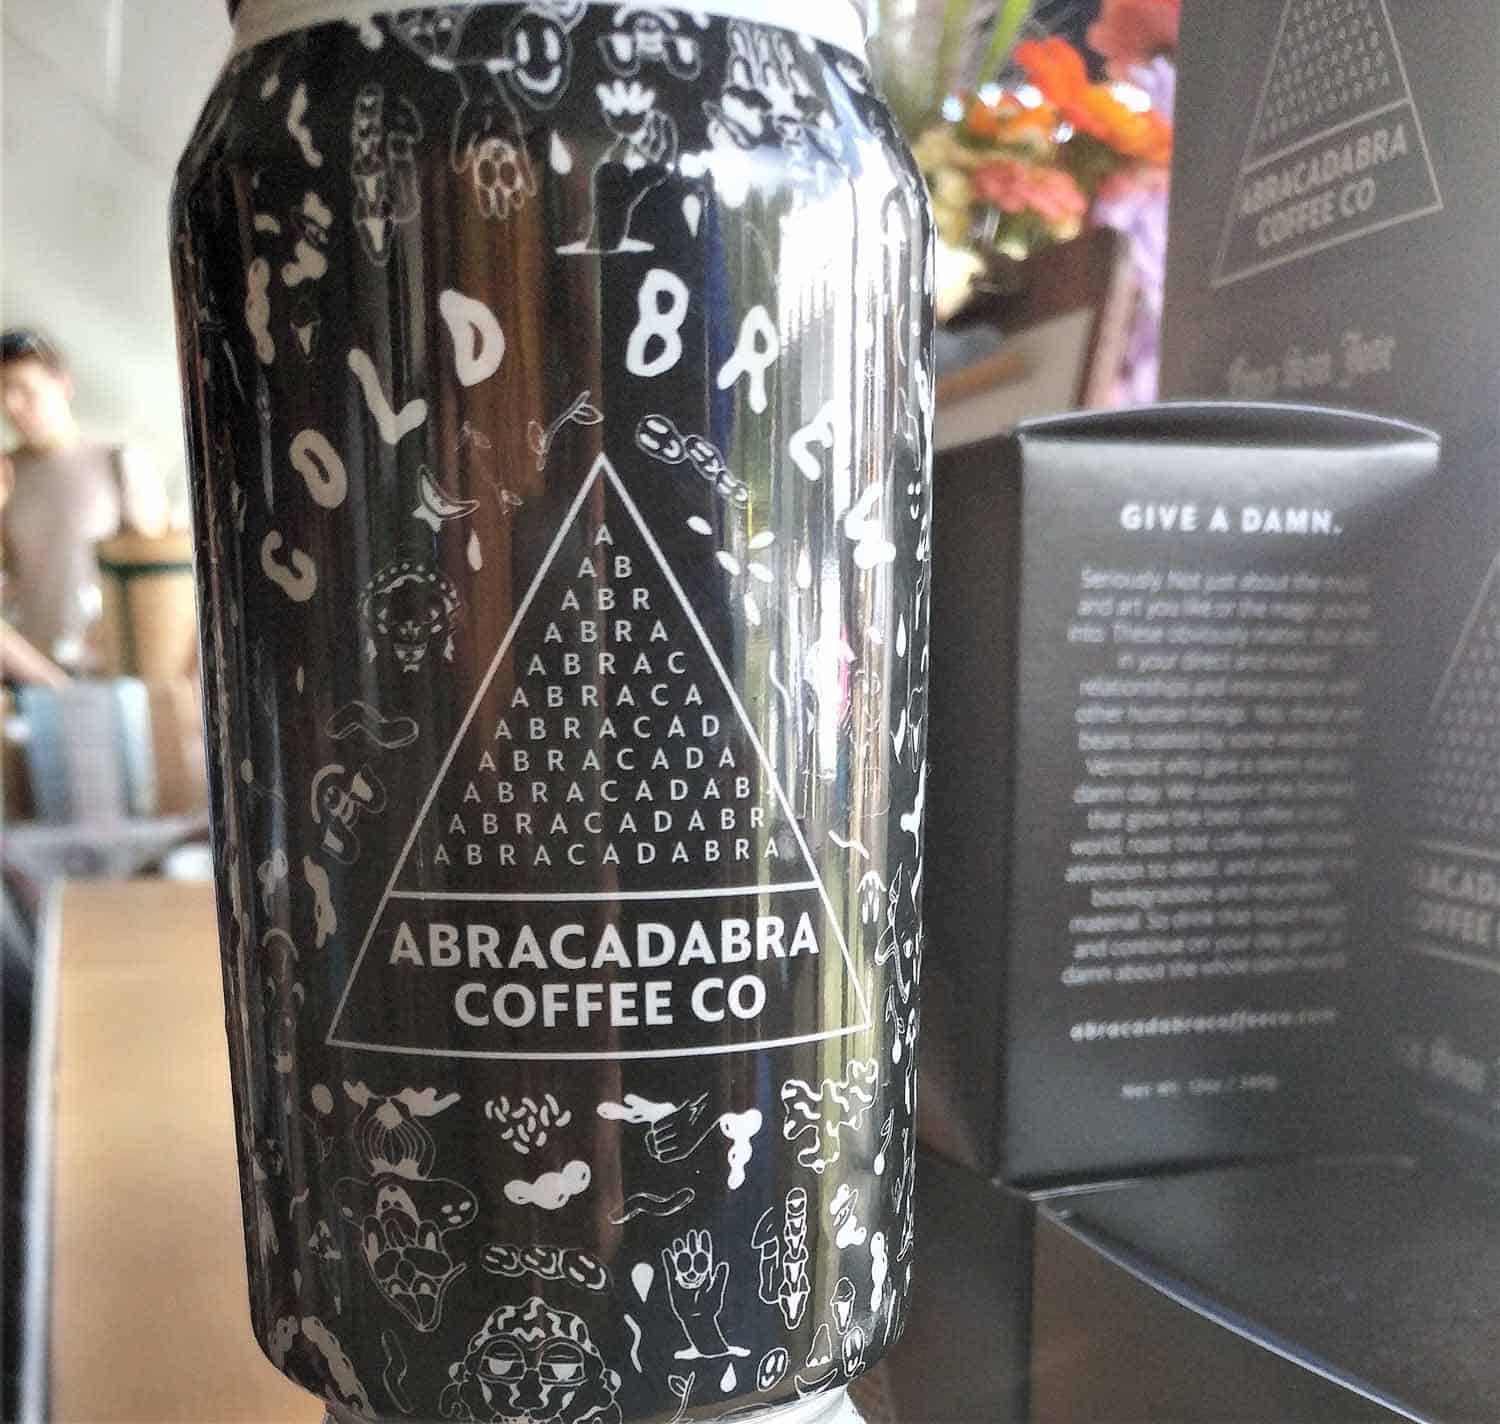 Vermont Cheese Festival-Abracadabra Coffee Co. Canned Cold Brew